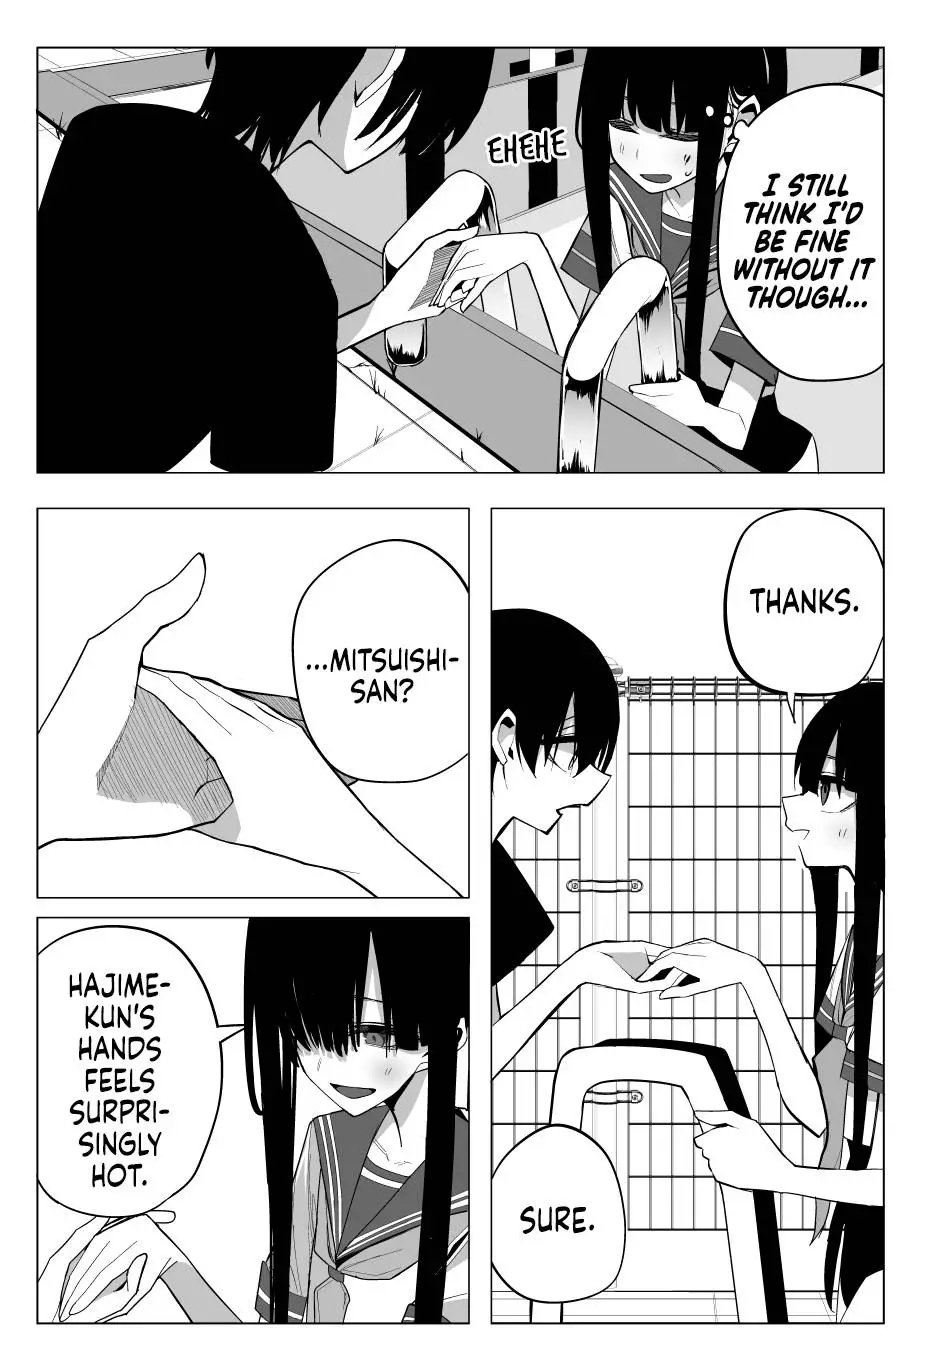 Mitsuishi-San Is Being Weird This Year - 20 page 17-5a972c8c